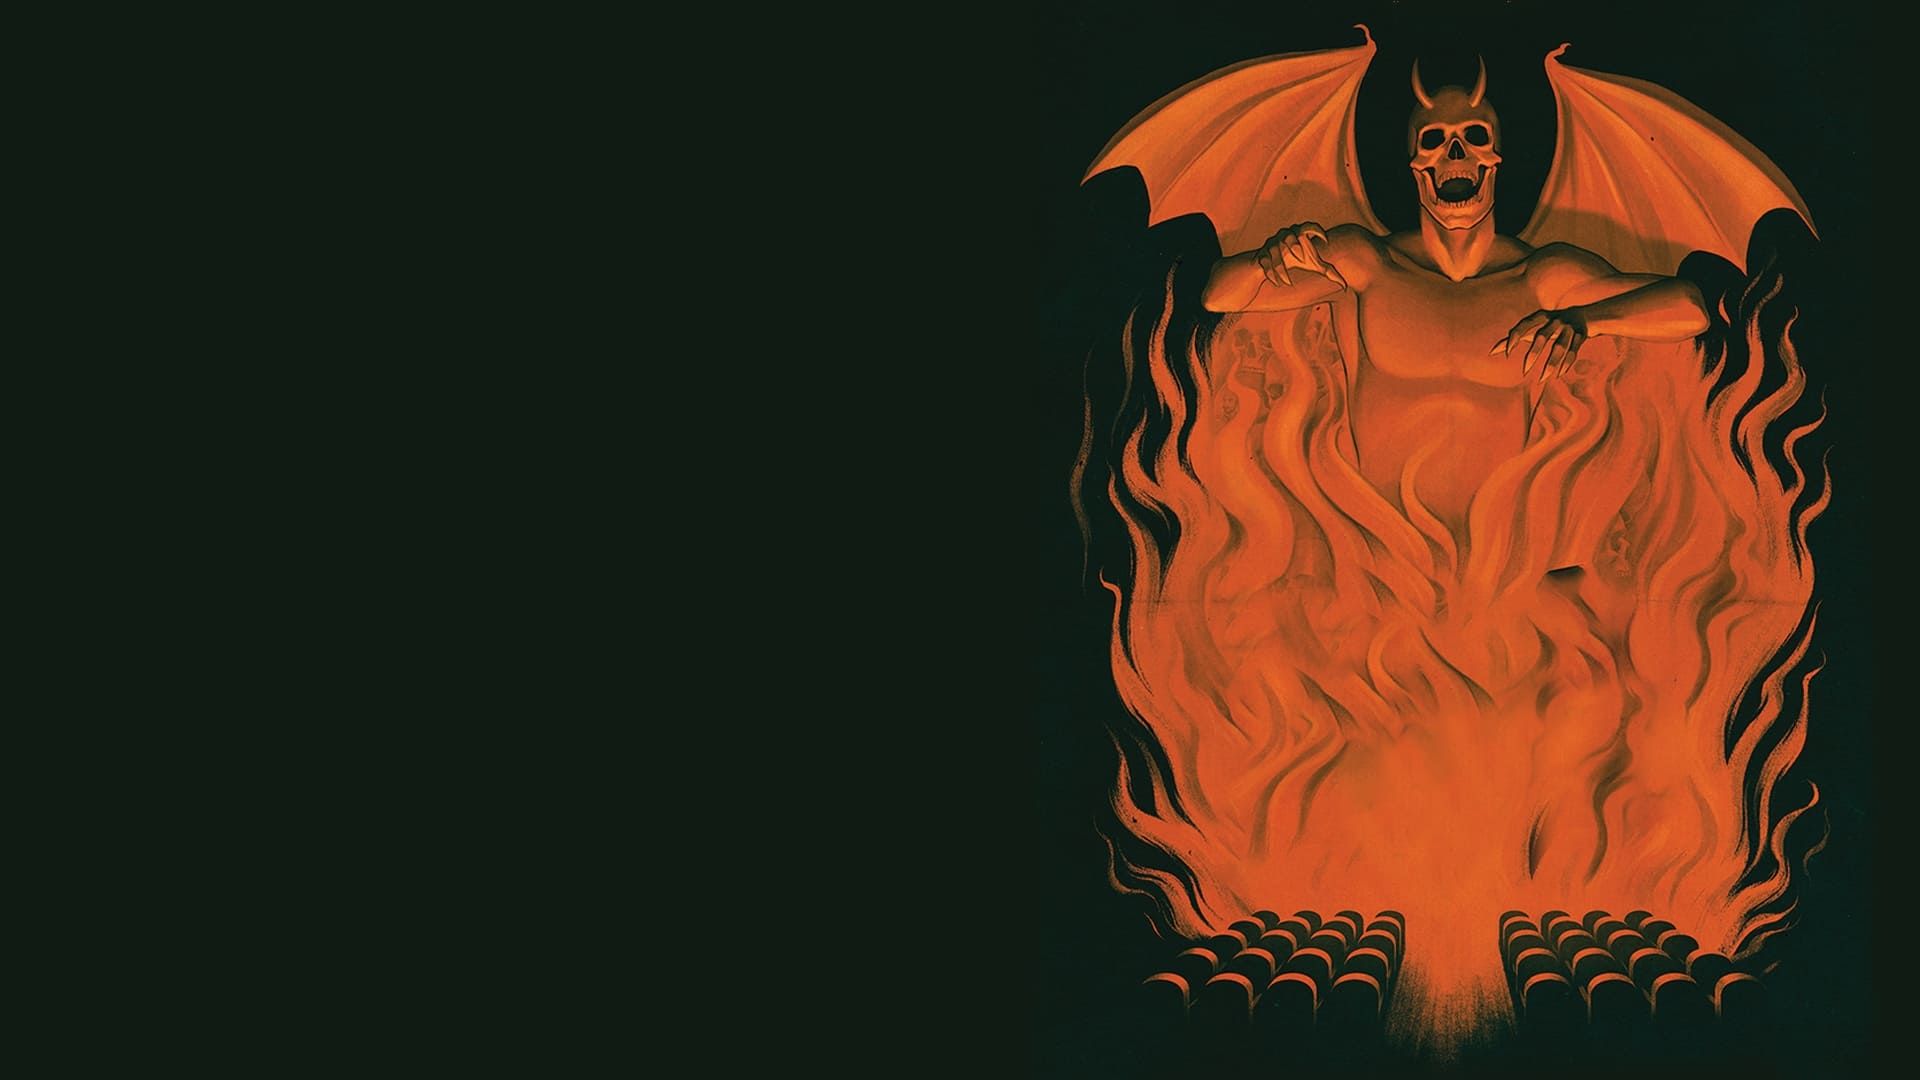 Fury of the Demon background